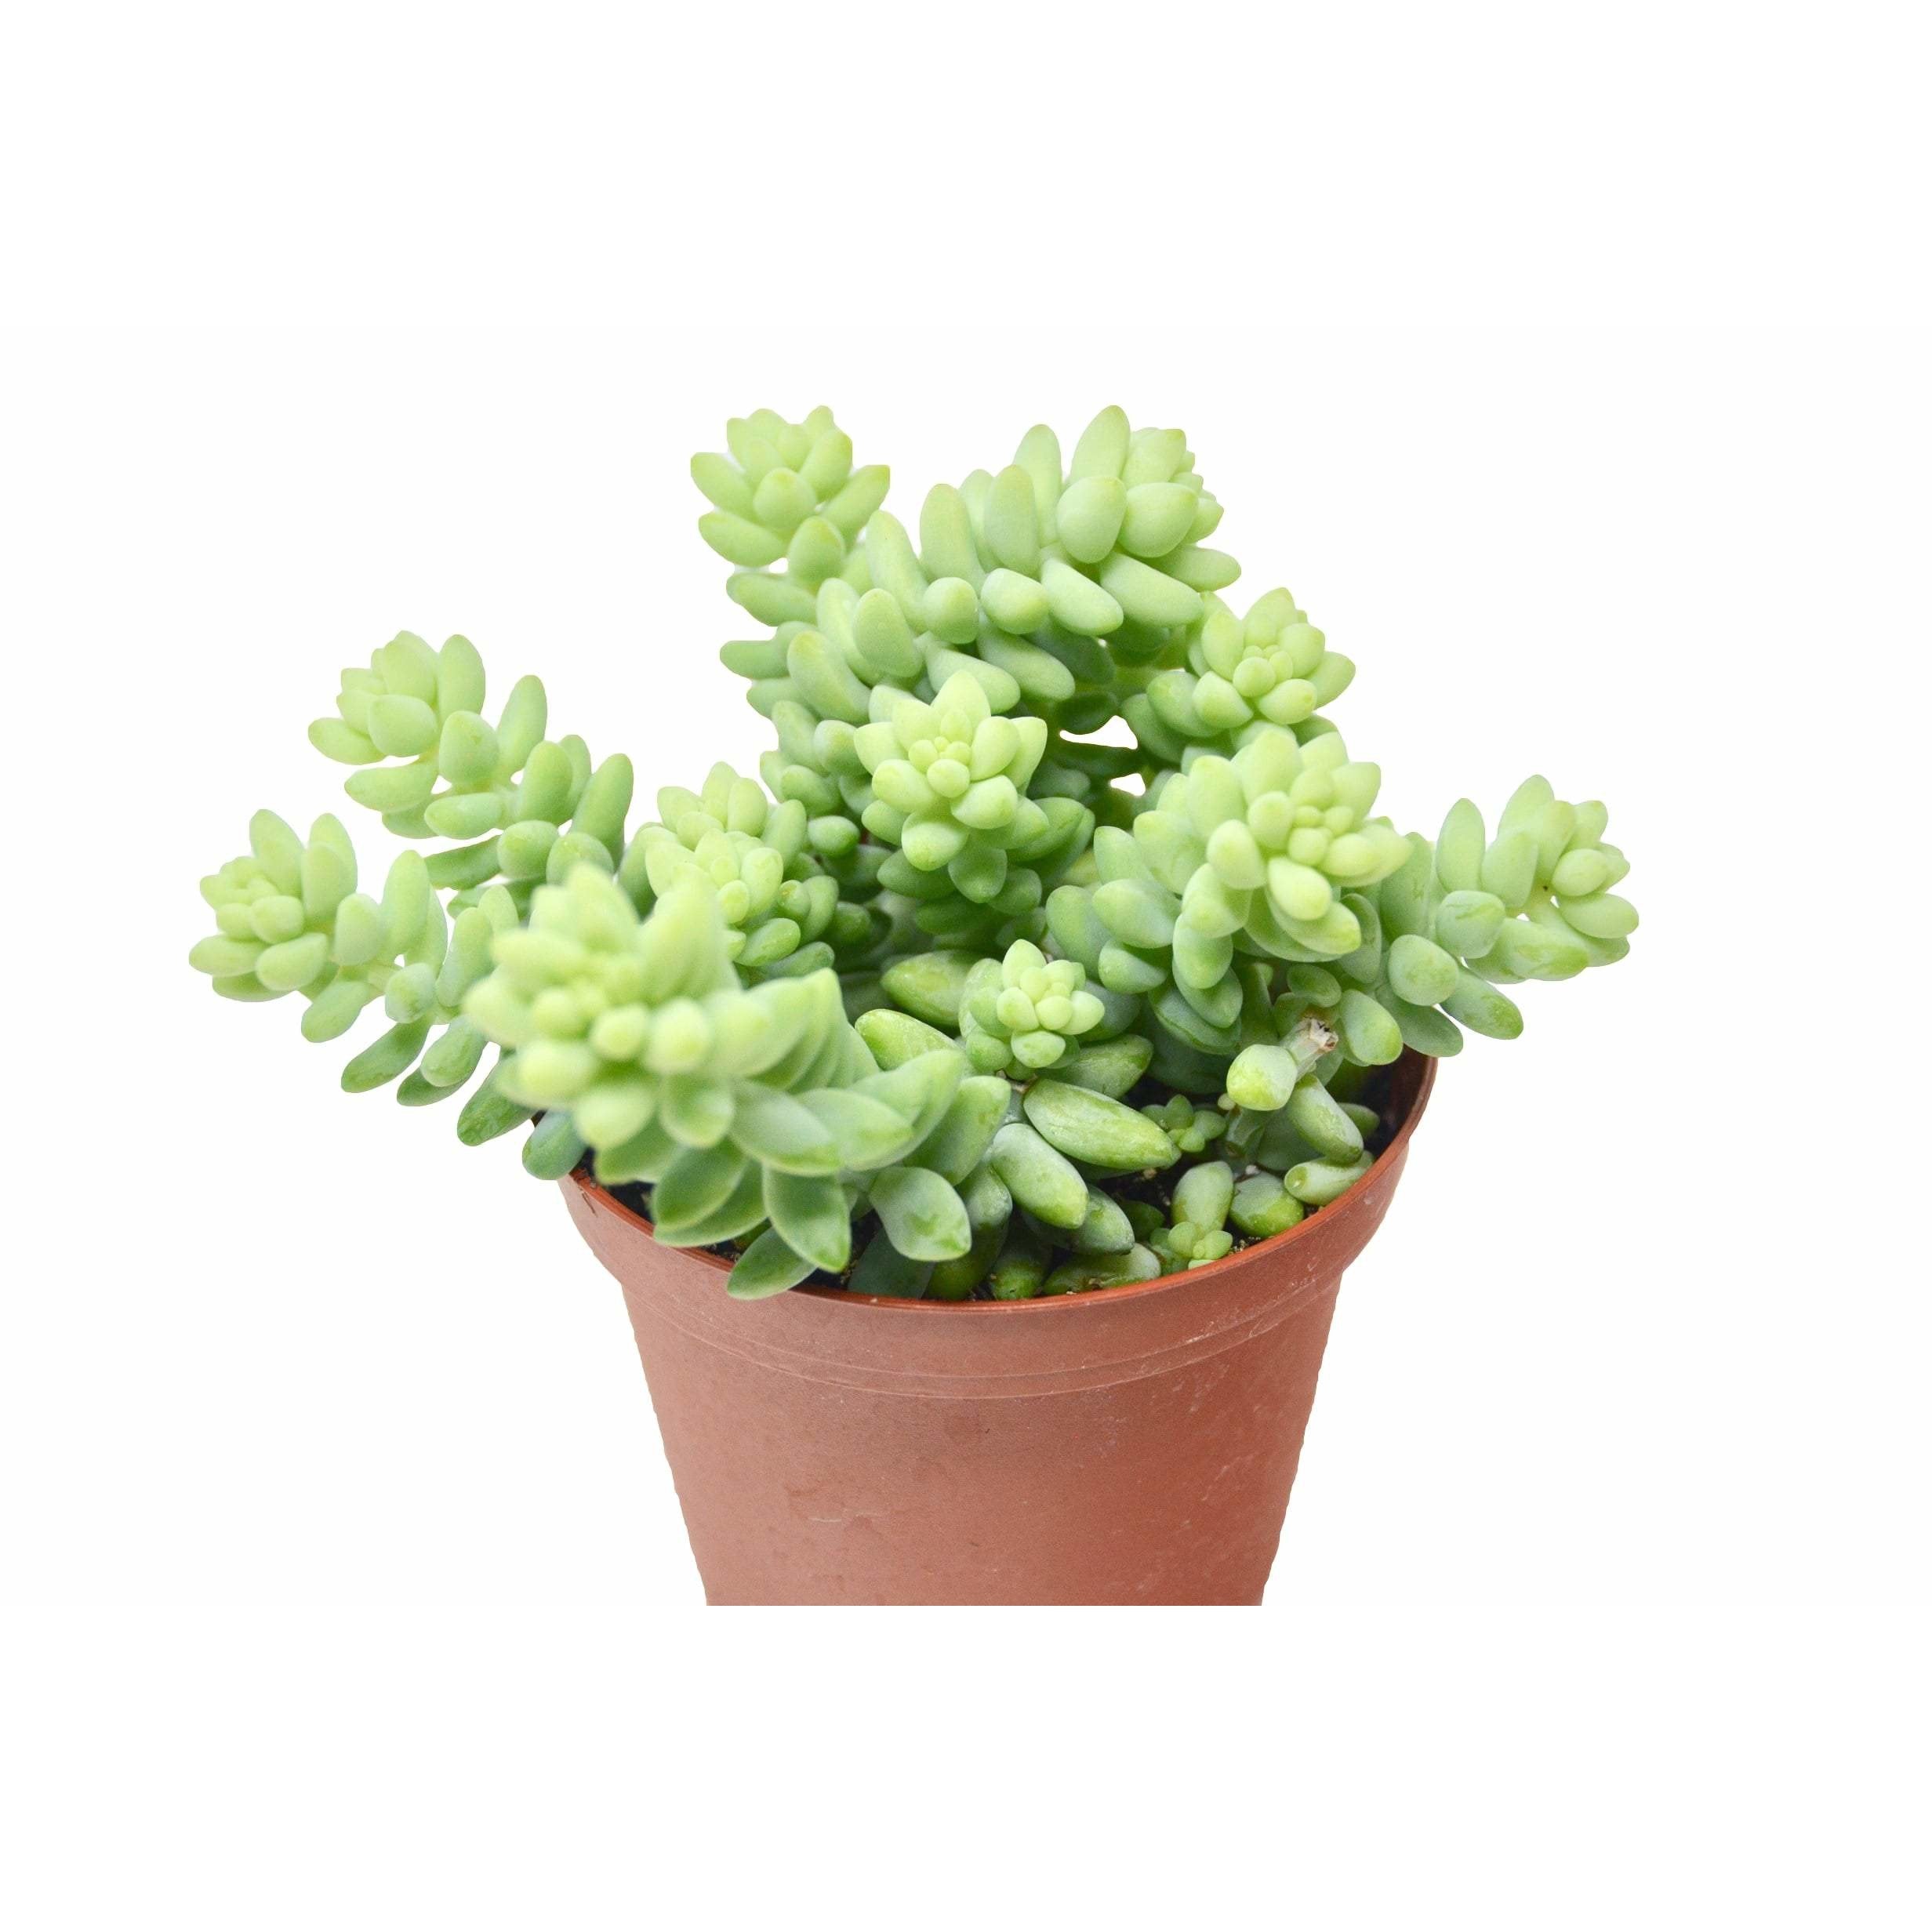 A green succulent plant in a pot on a white background at the best garden nursery near me.